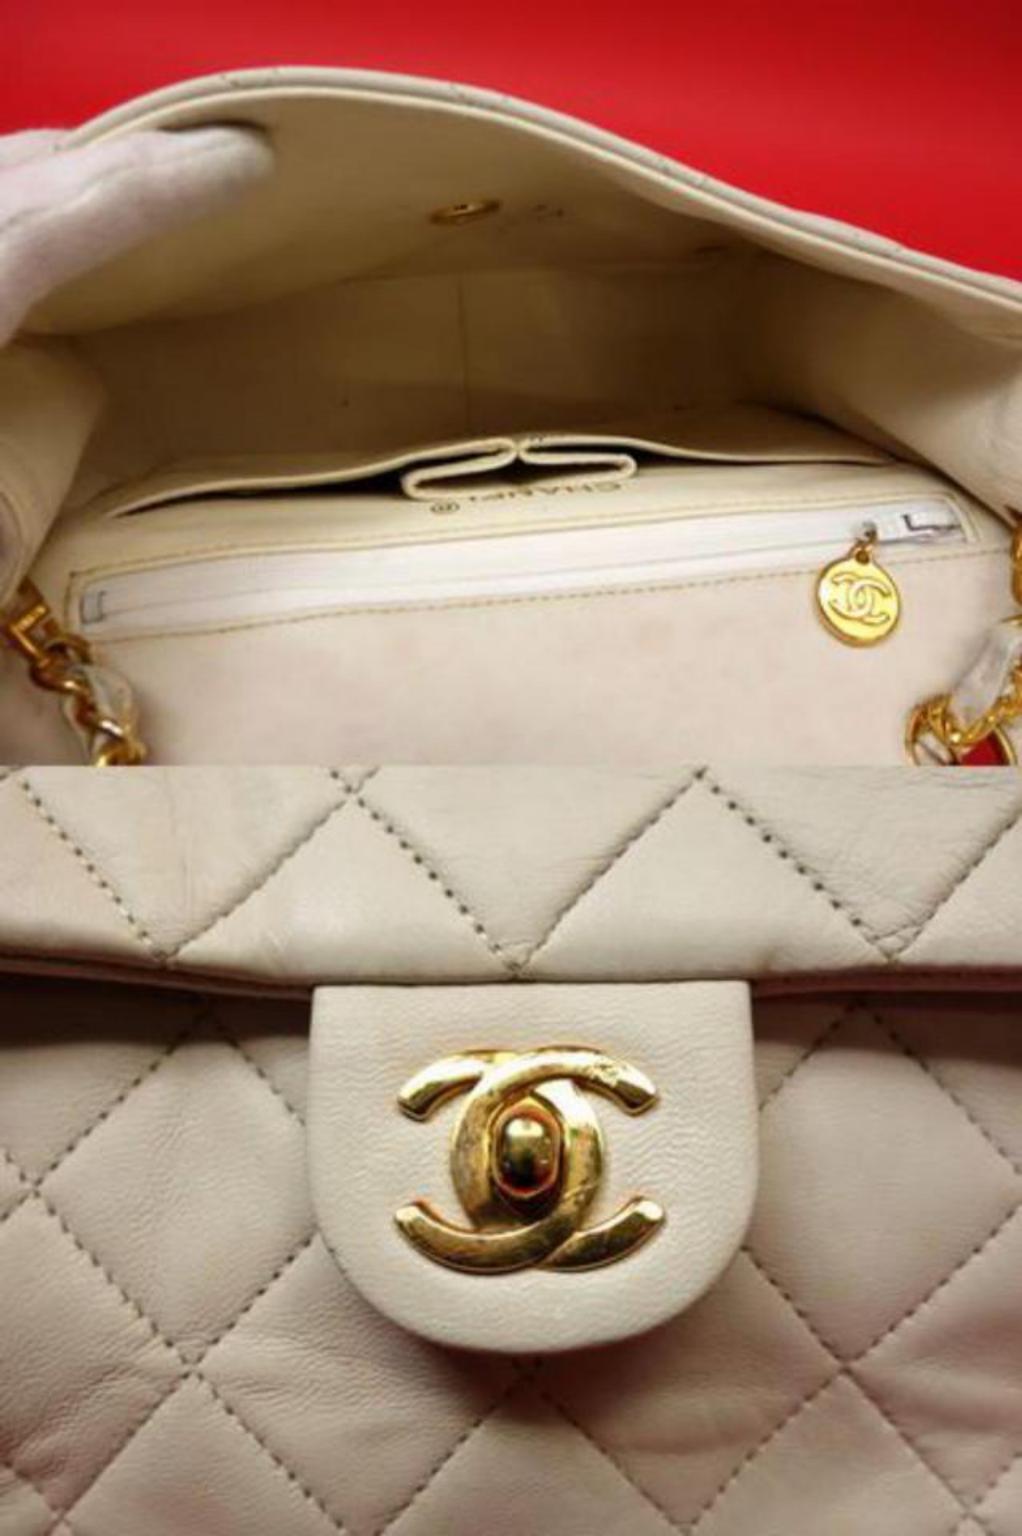 Chanel Classic Flap Small Square 224316 White Leather Shoulder Bag In Fair Condition For Sale In Forest Hills, NY